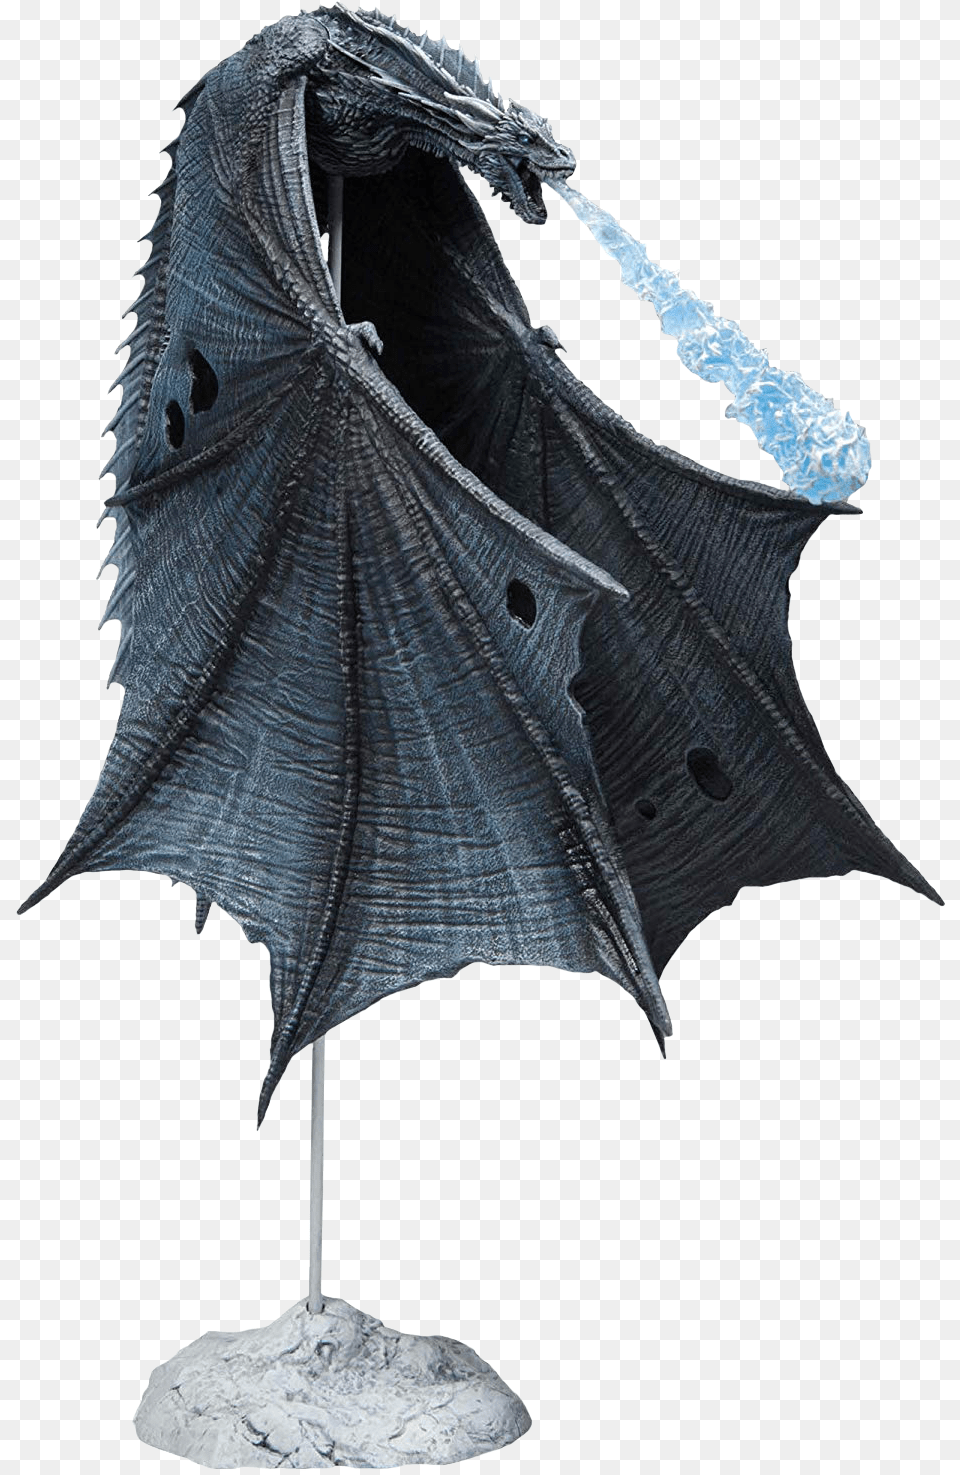 Game Of Thrones Dragon Images Mcfarlane Game Of Thrones Viserion, Animal, Lizard, Reptile Png Image